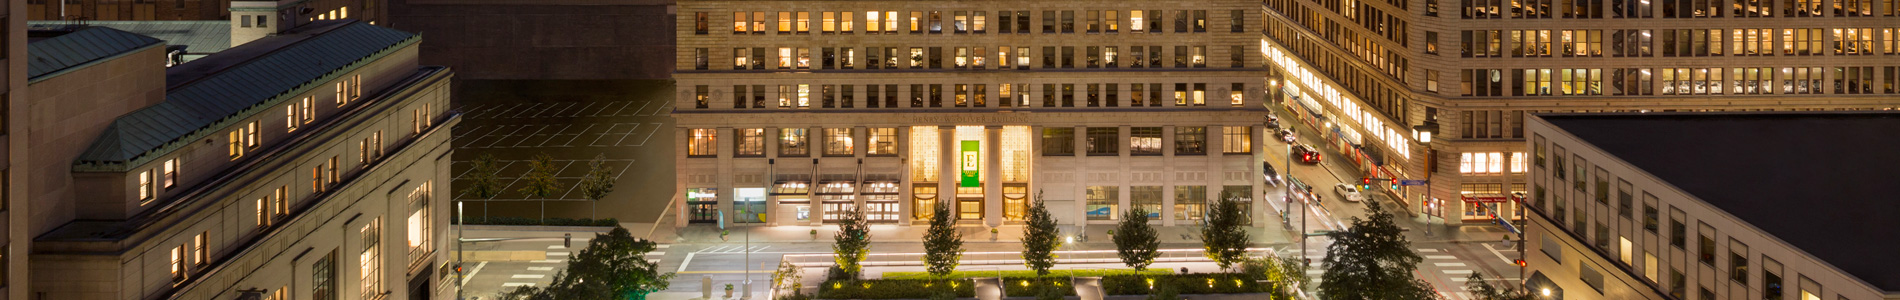 Indus Hotels Develops The Embassy Suites In Downtown Pittsburgh